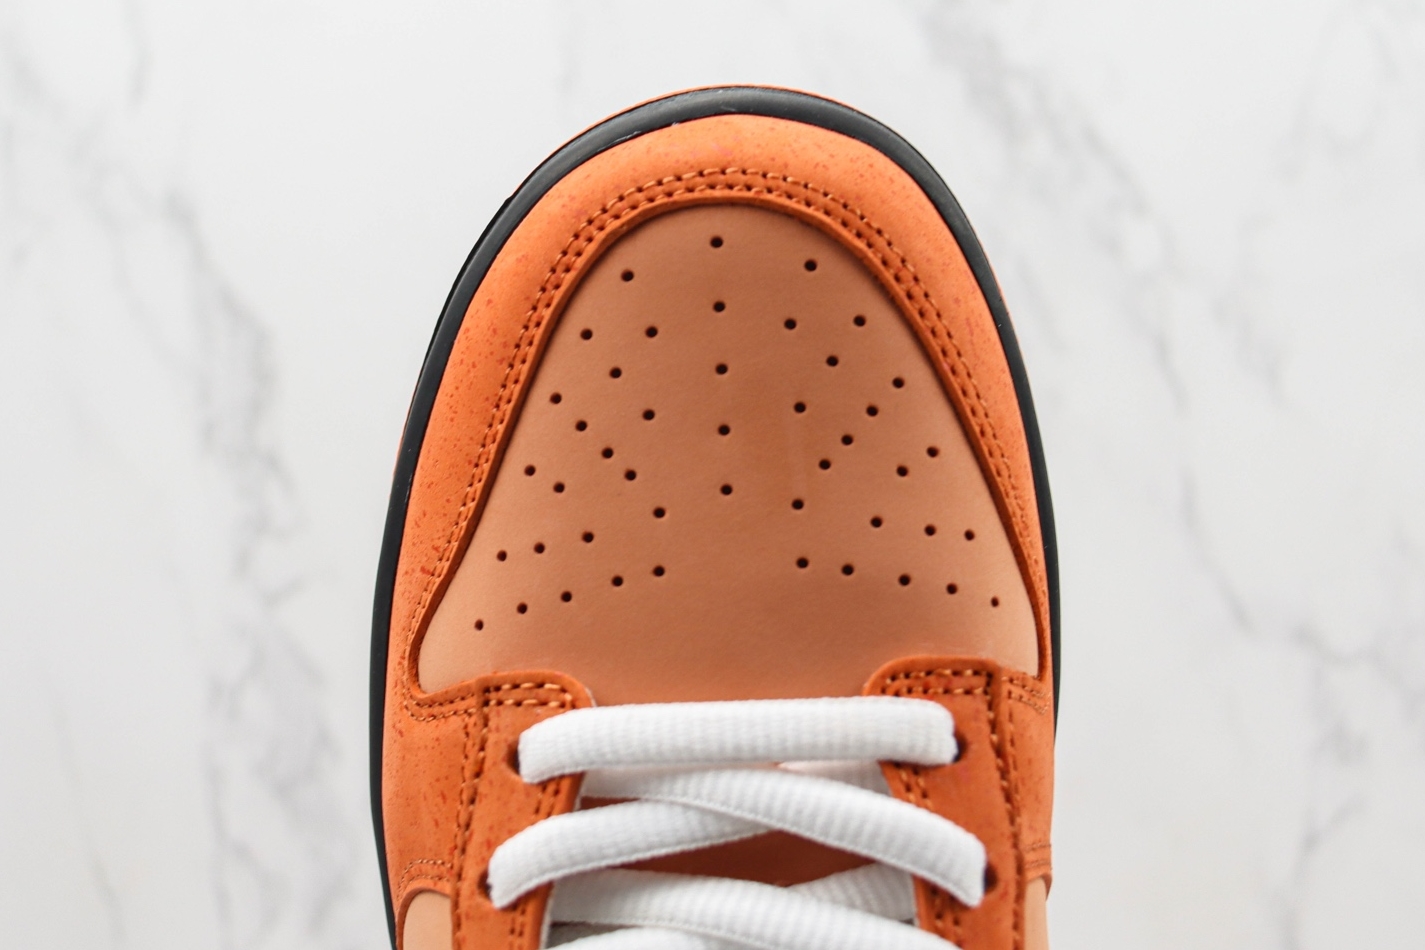 Nike SB Dunk Low 'Concepts Orange Lobster' FD8776-800 - Limited Edition Stylish Sneakers